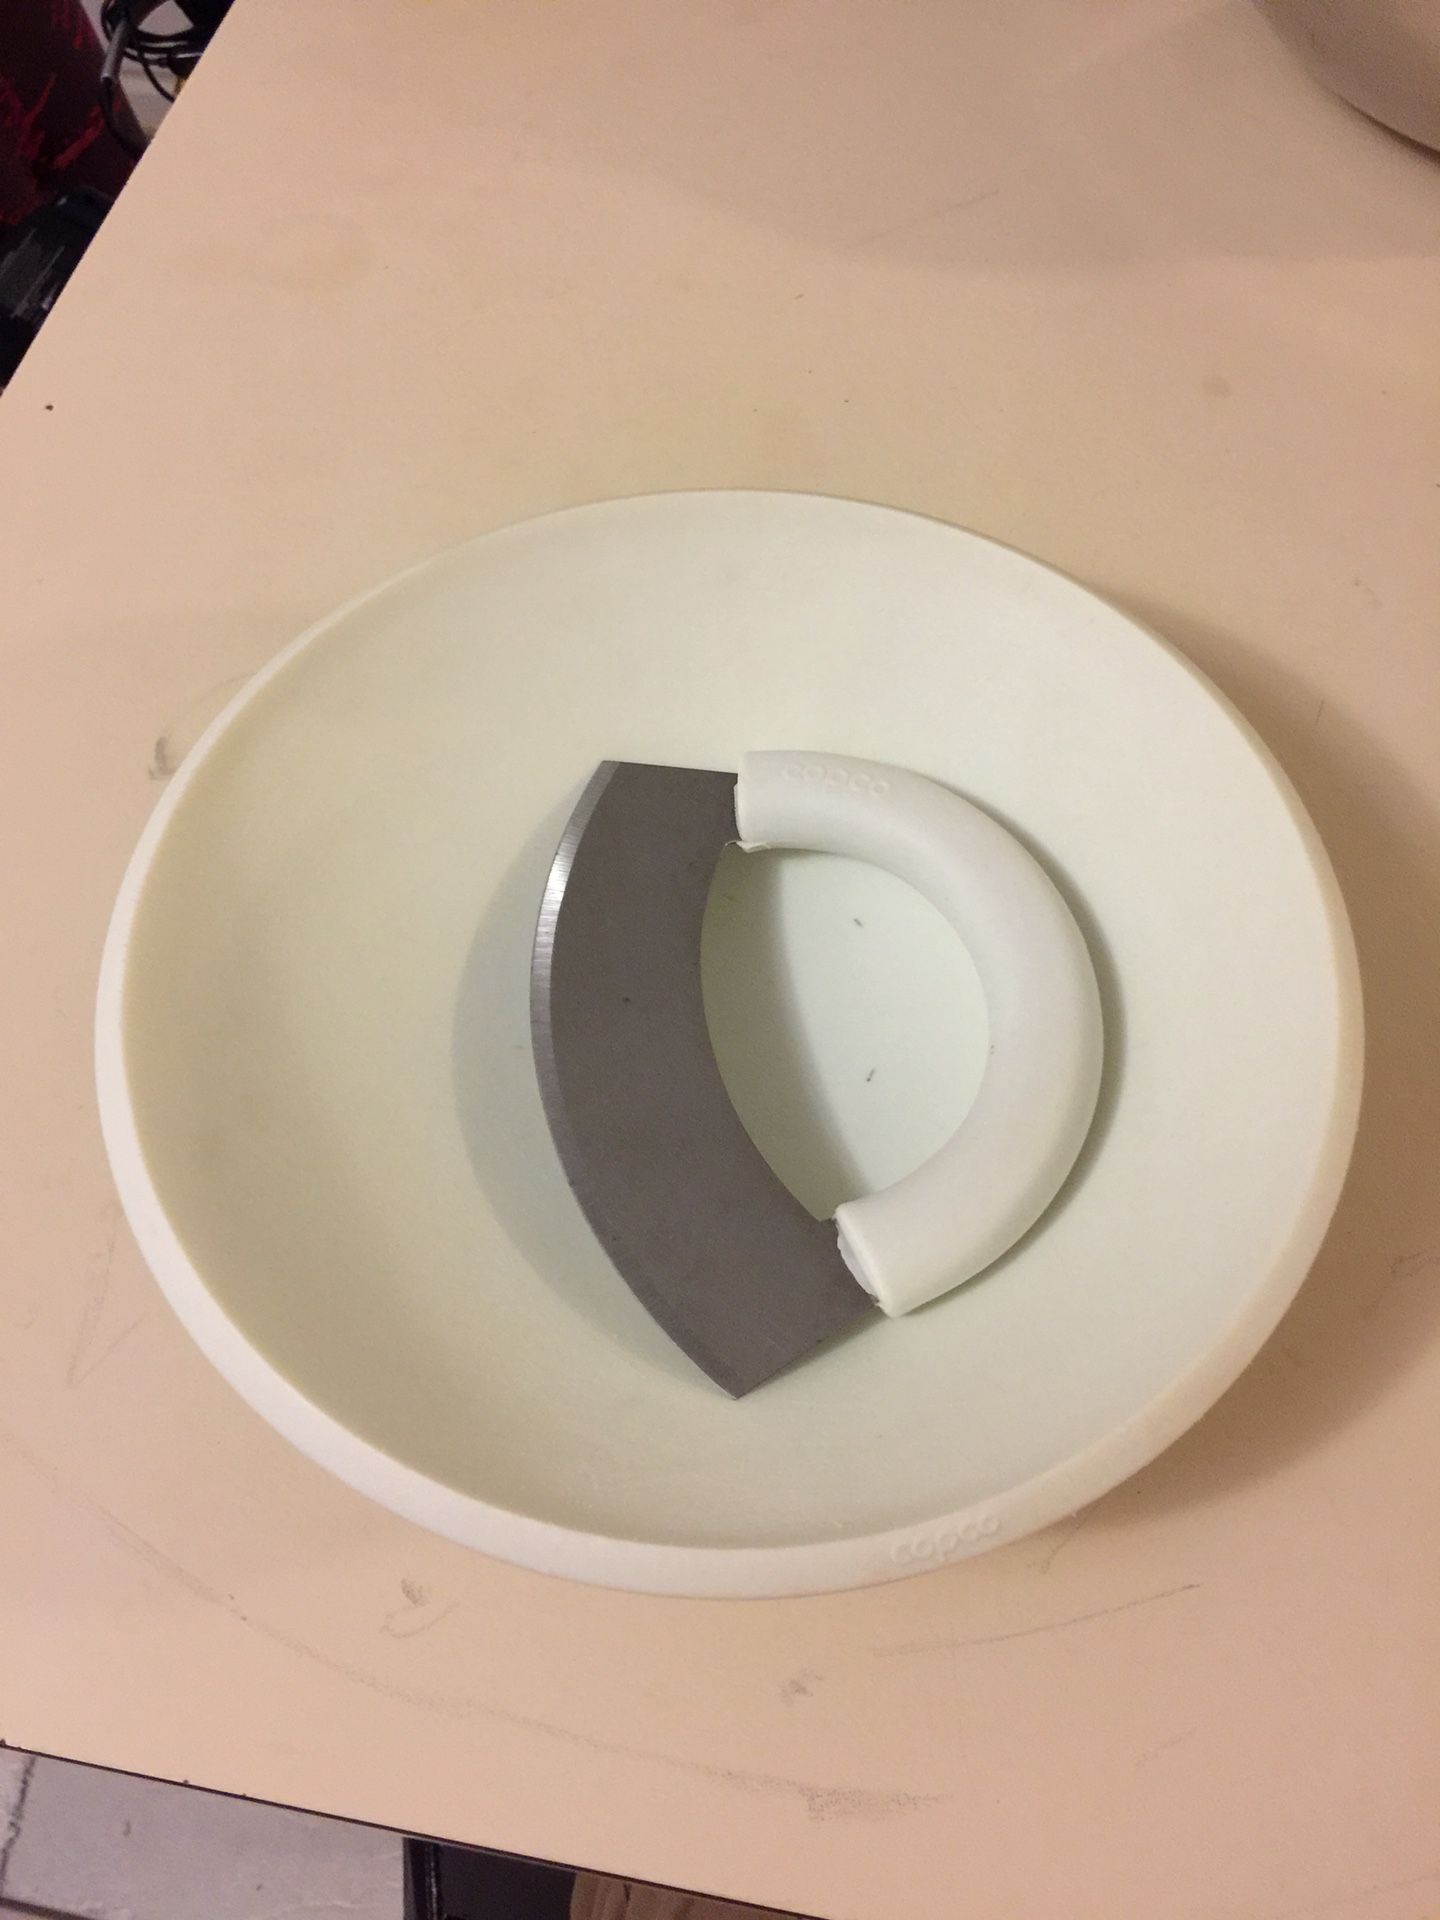 Copco Chopping bowl for Sale in Fort Lauderdale, FL - OfferUp